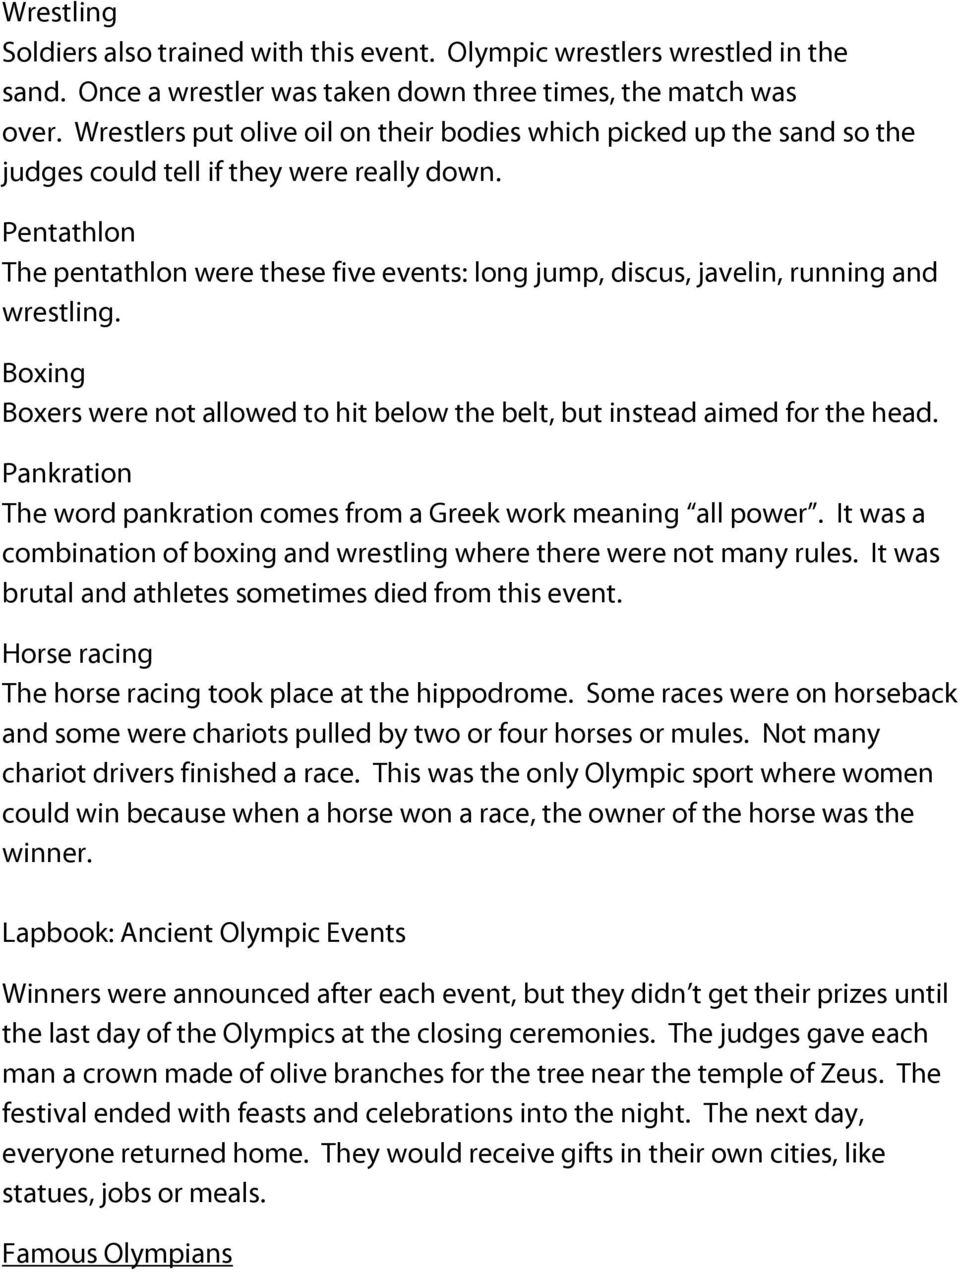 Pentathlon The pentathlon were these five events: long jump, discus, javelin, running and wrestling. Boxing Boxers were not allowed to hit below the belt, but instead aimed for the head.